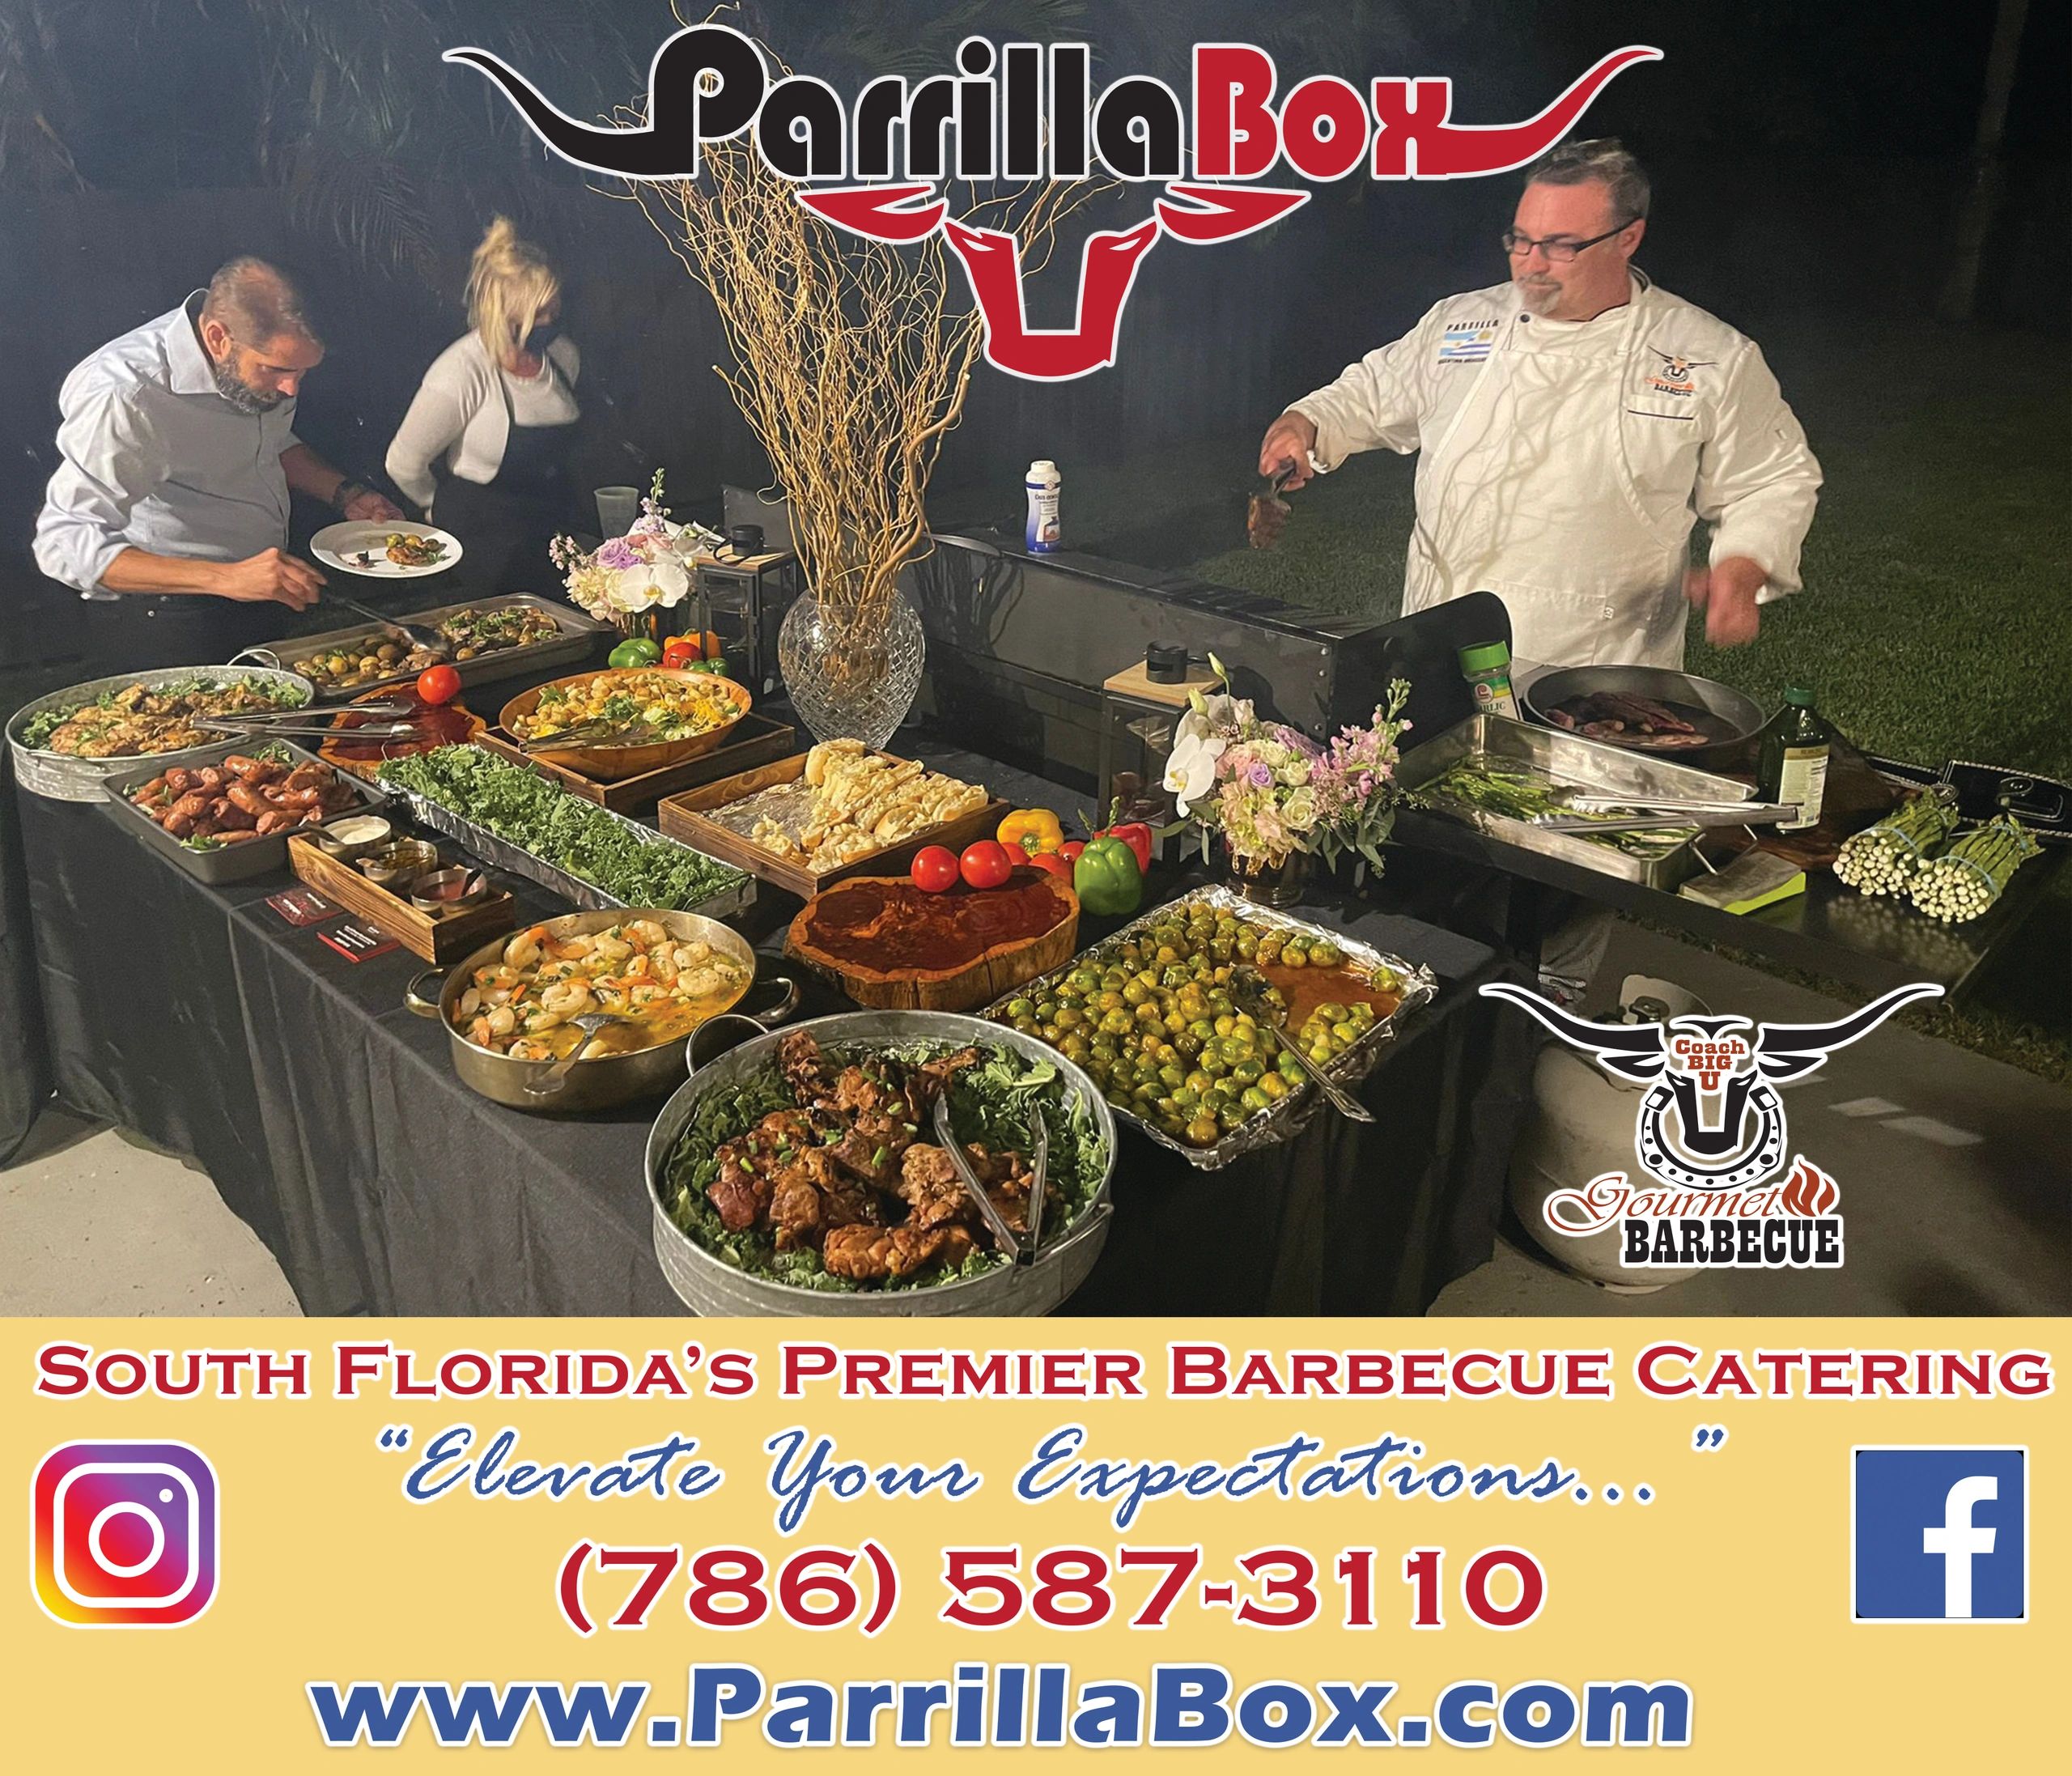 Barbecue Rental Services For Parties | BBQ Catering Services in Miami